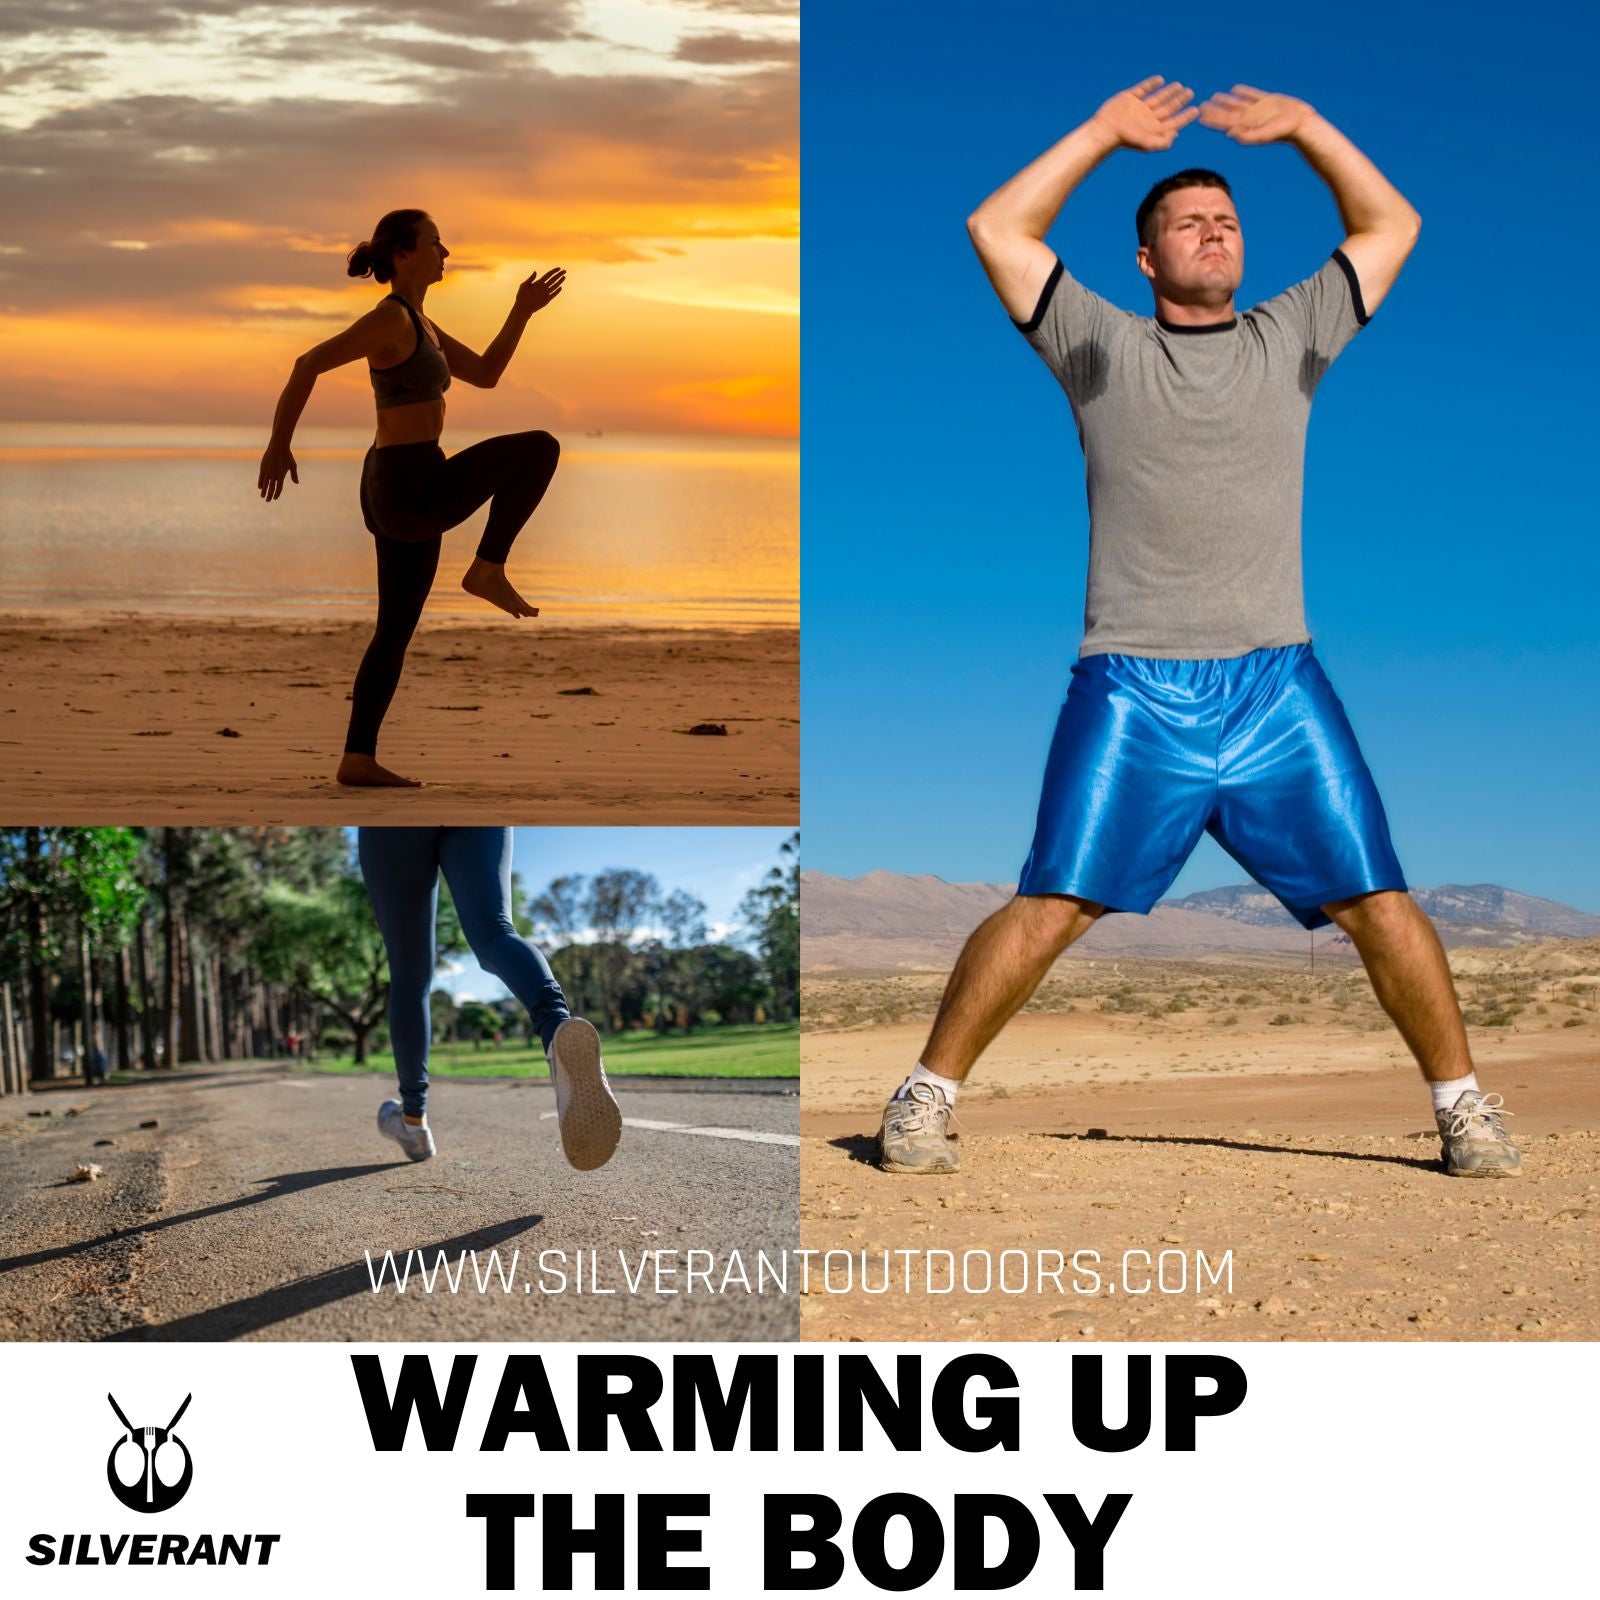 First and Foremost - Warming Up the Body